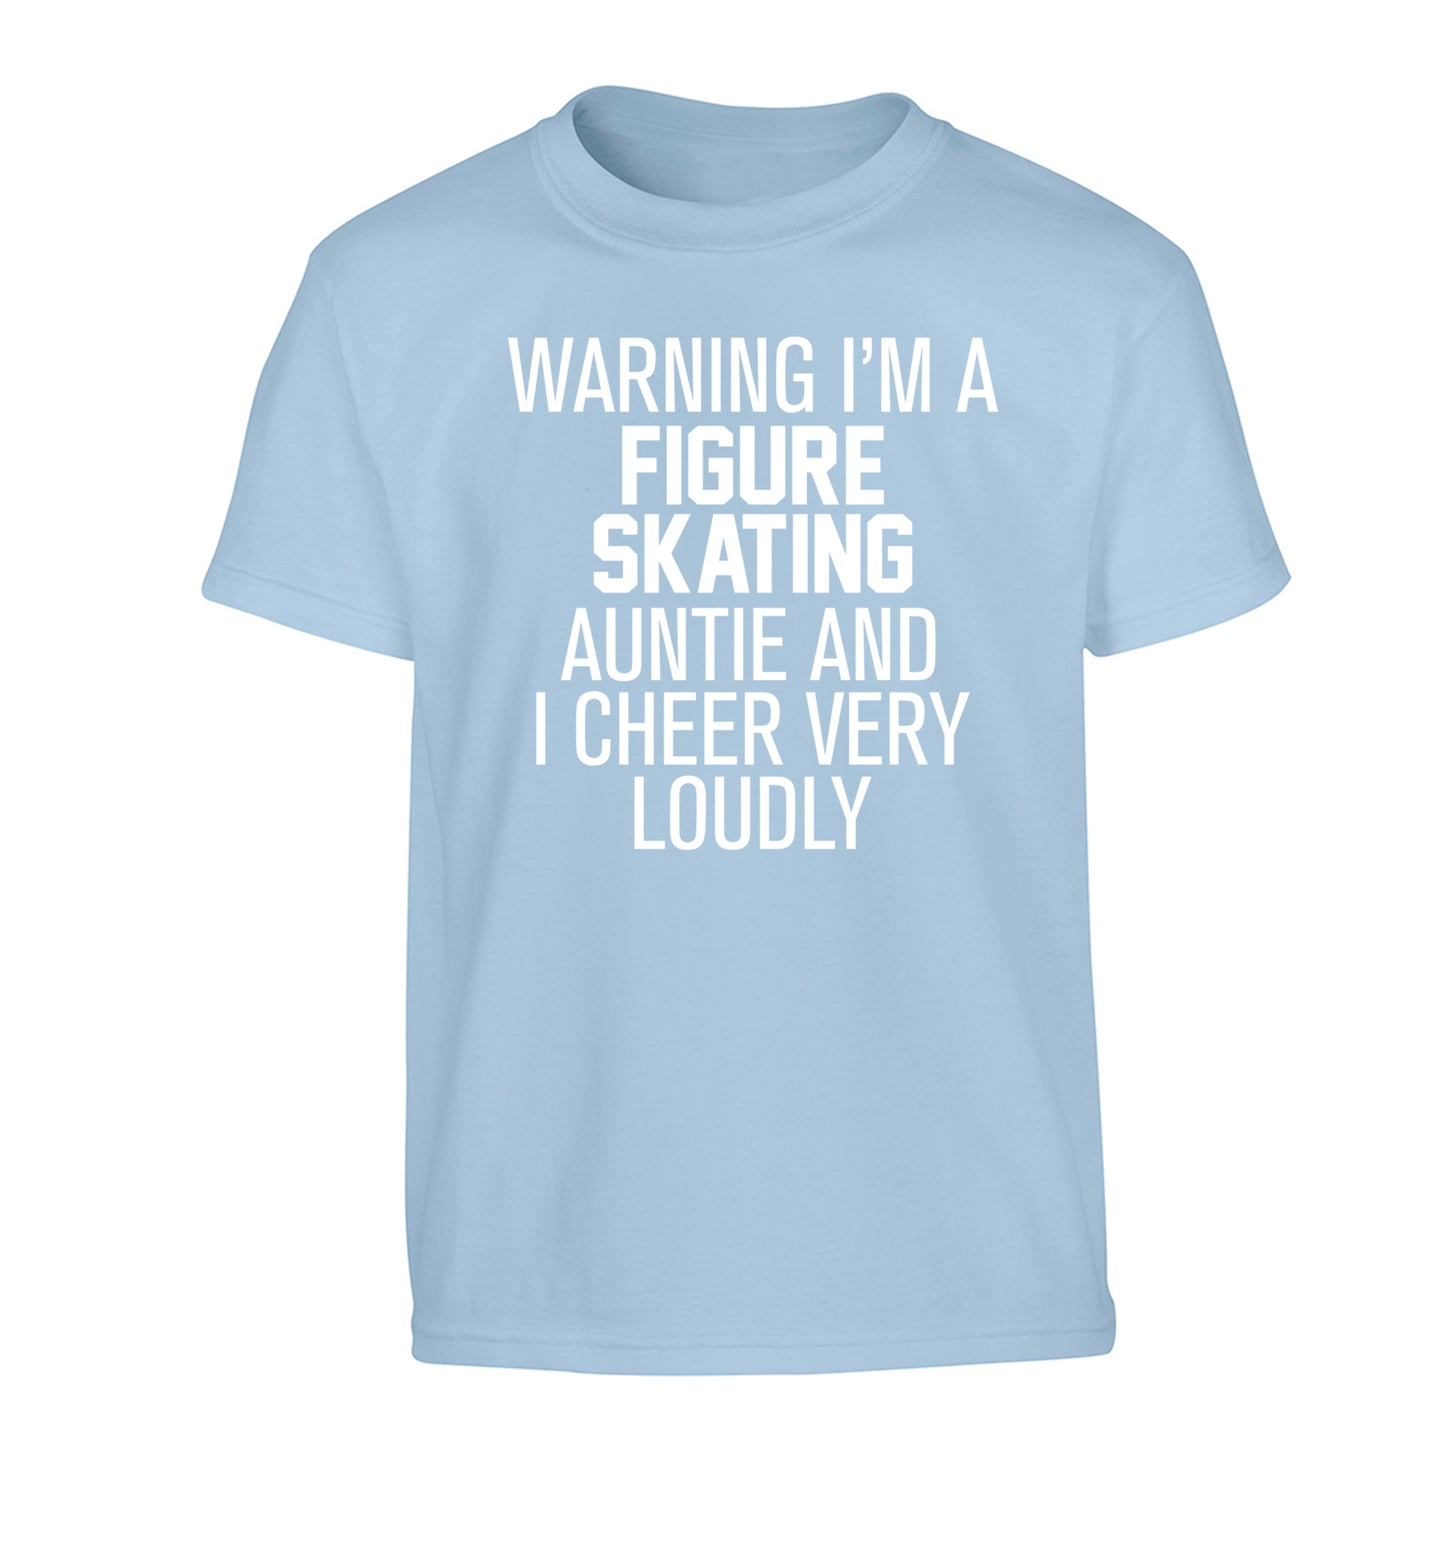 Warning I'm a figure skating auntie and I cheer very loudly Children's light blue Tshirt 12-14 Years